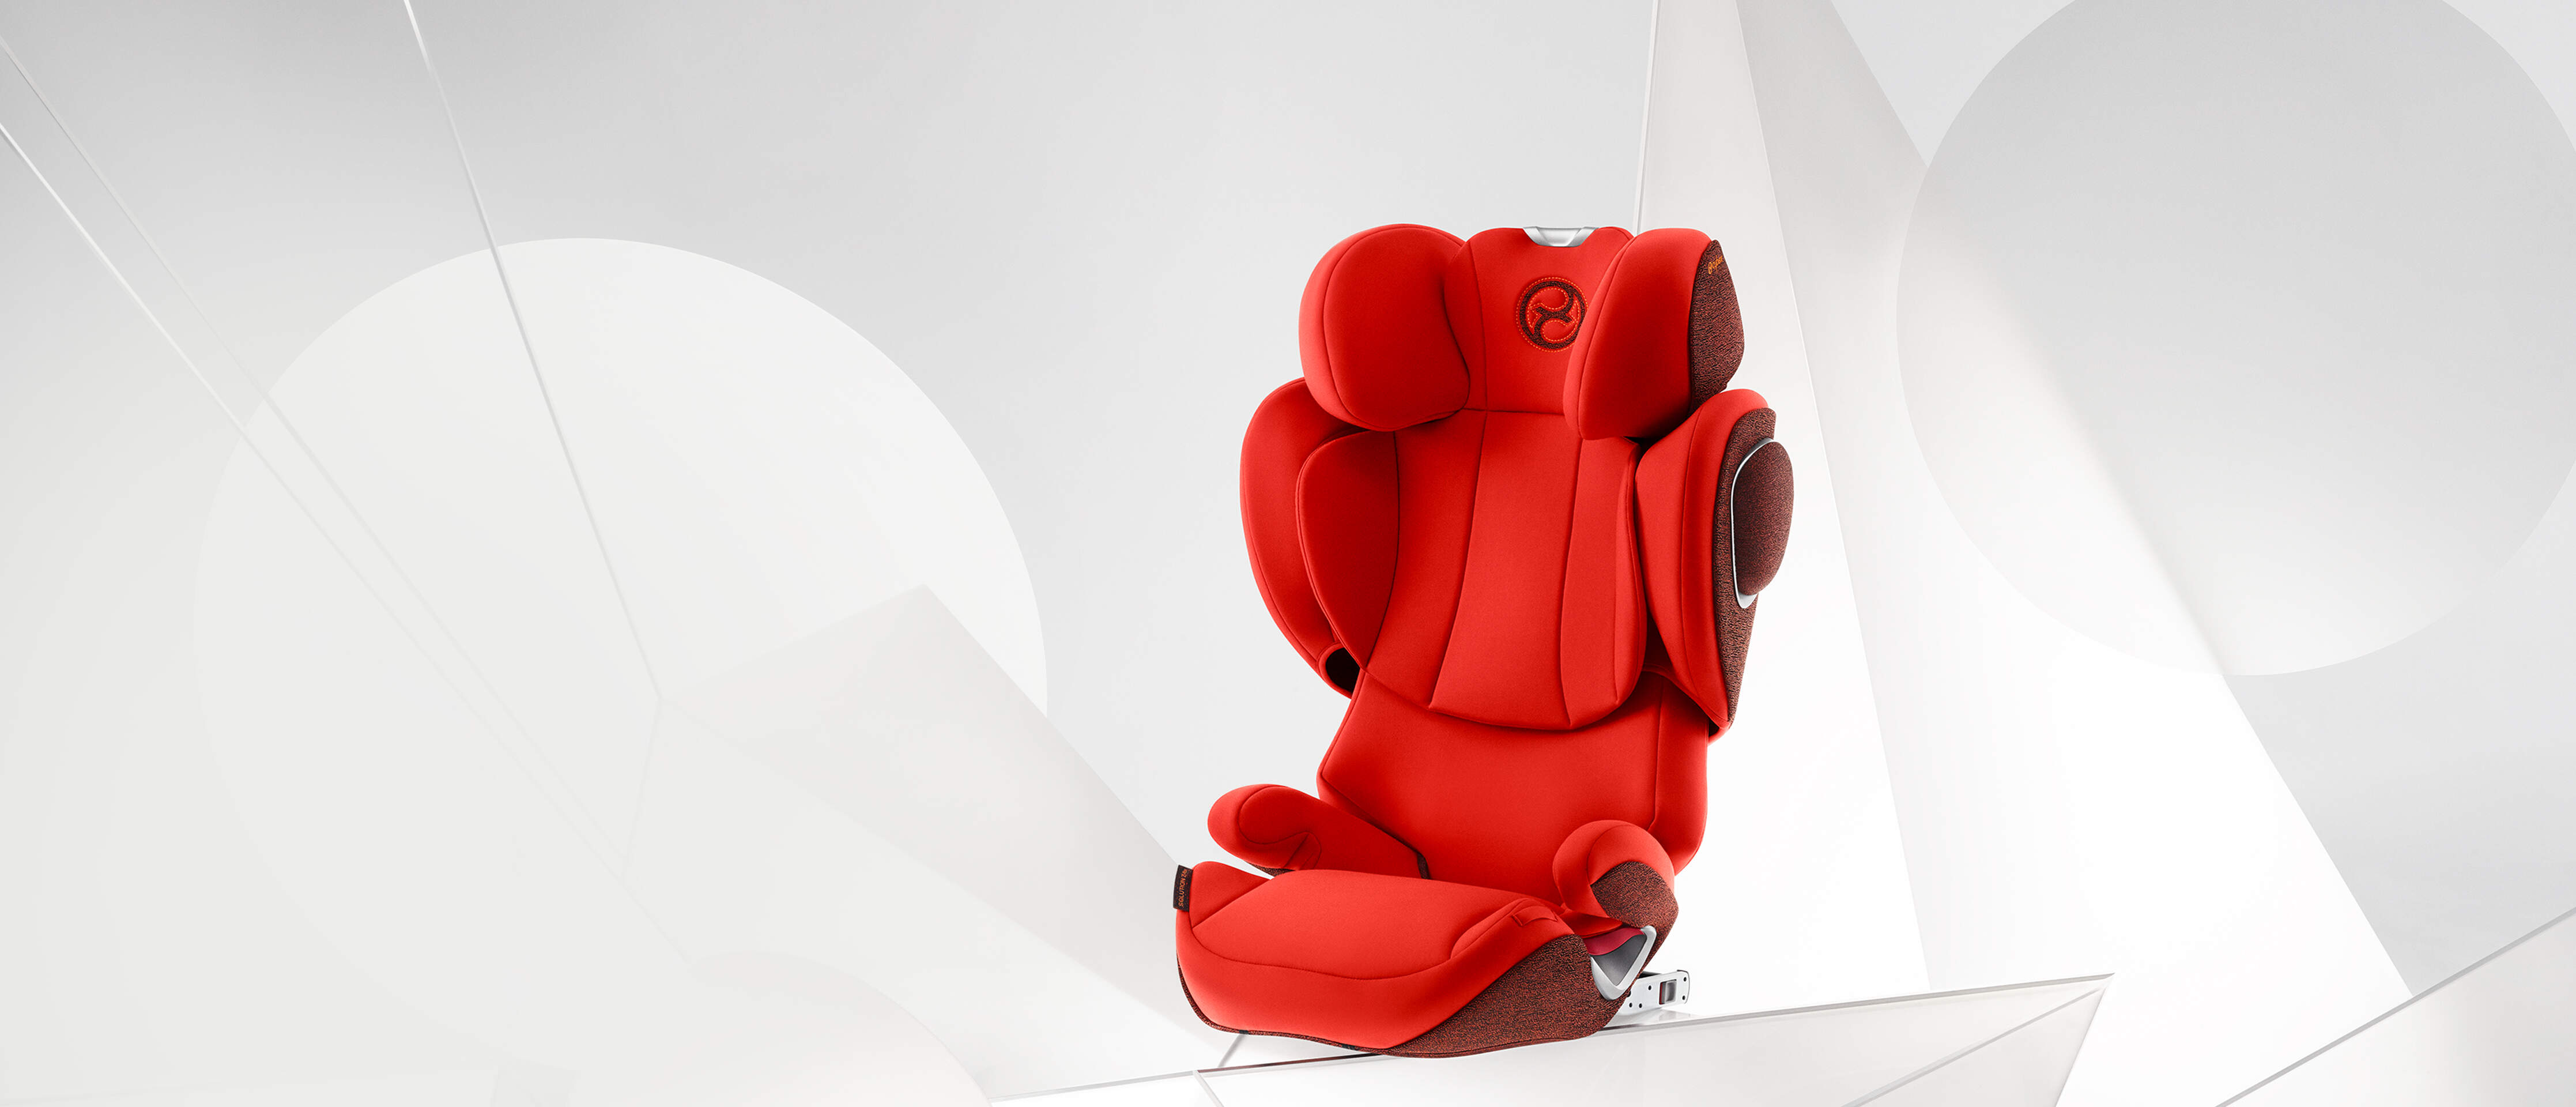 The Solution Z-Fix Car Seat by Cybex Platinum